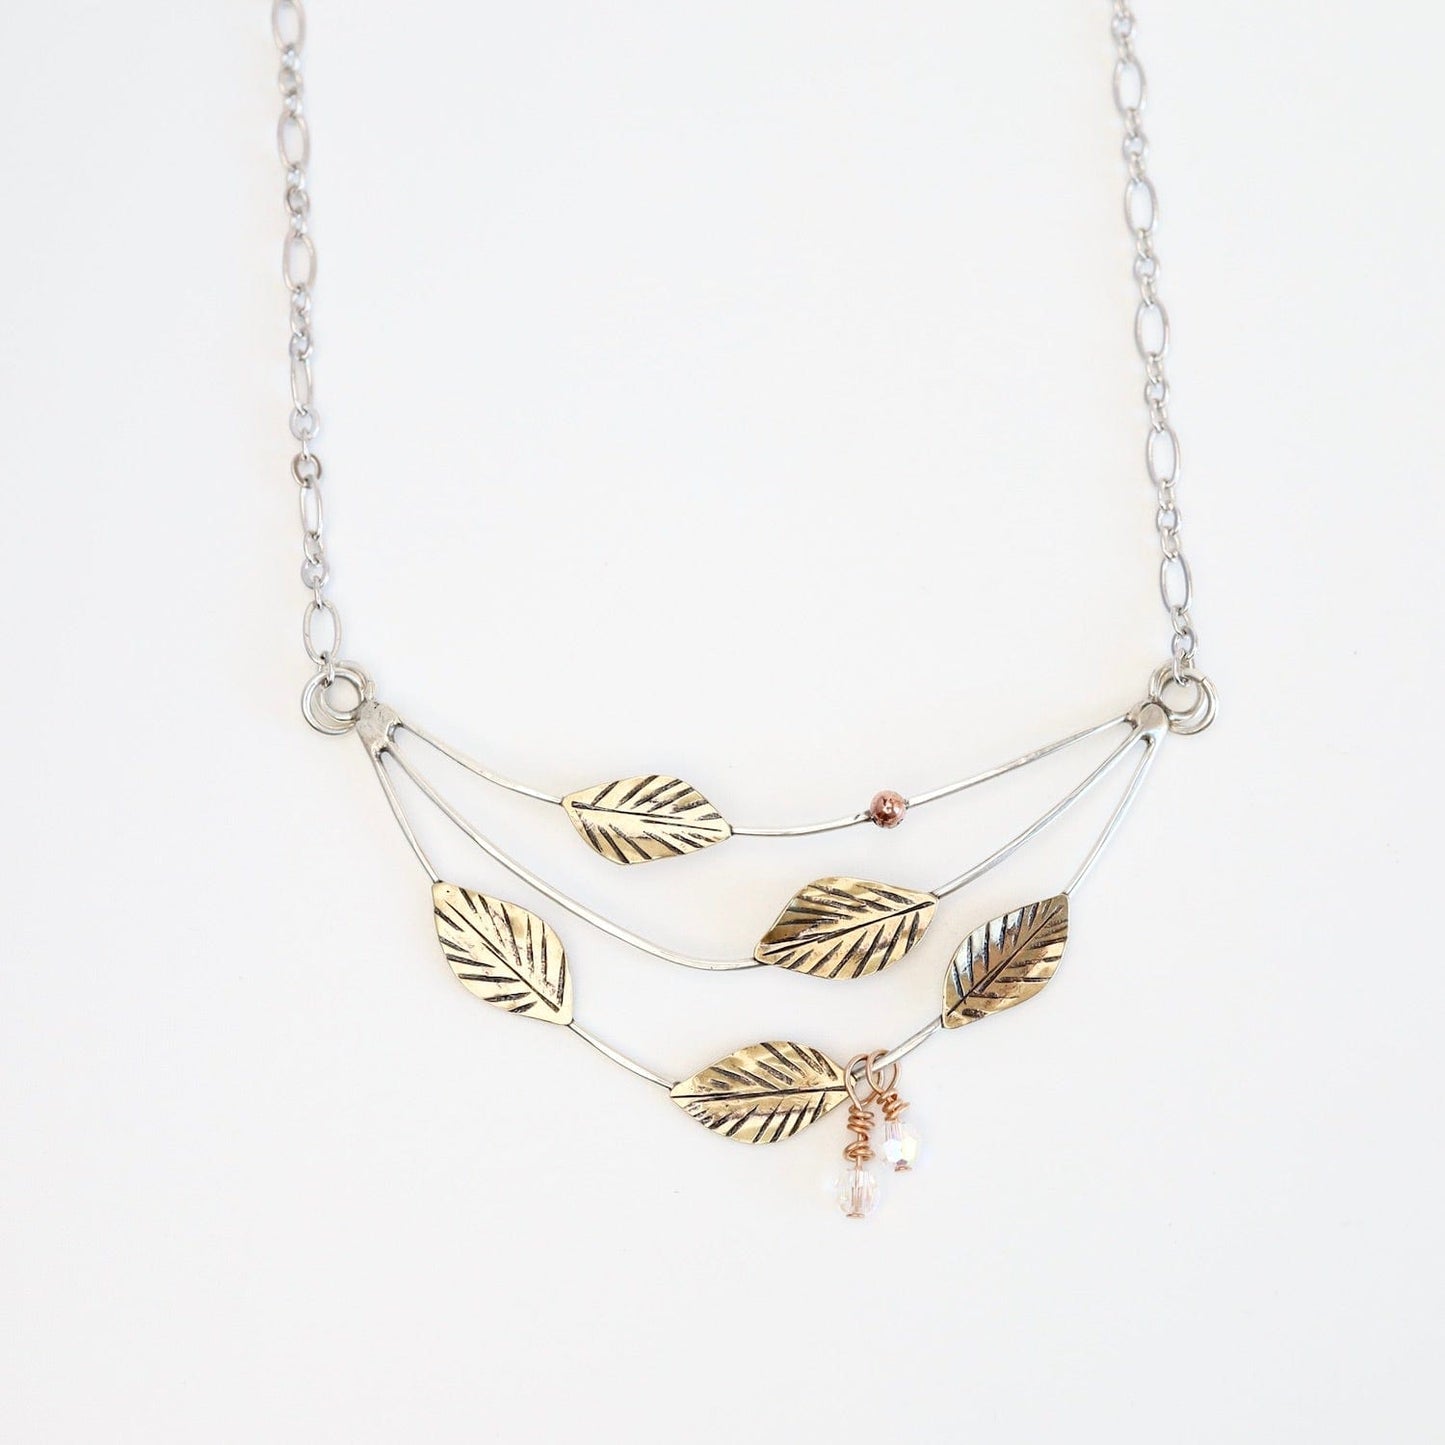 NKL Leaves Adornment Necklace